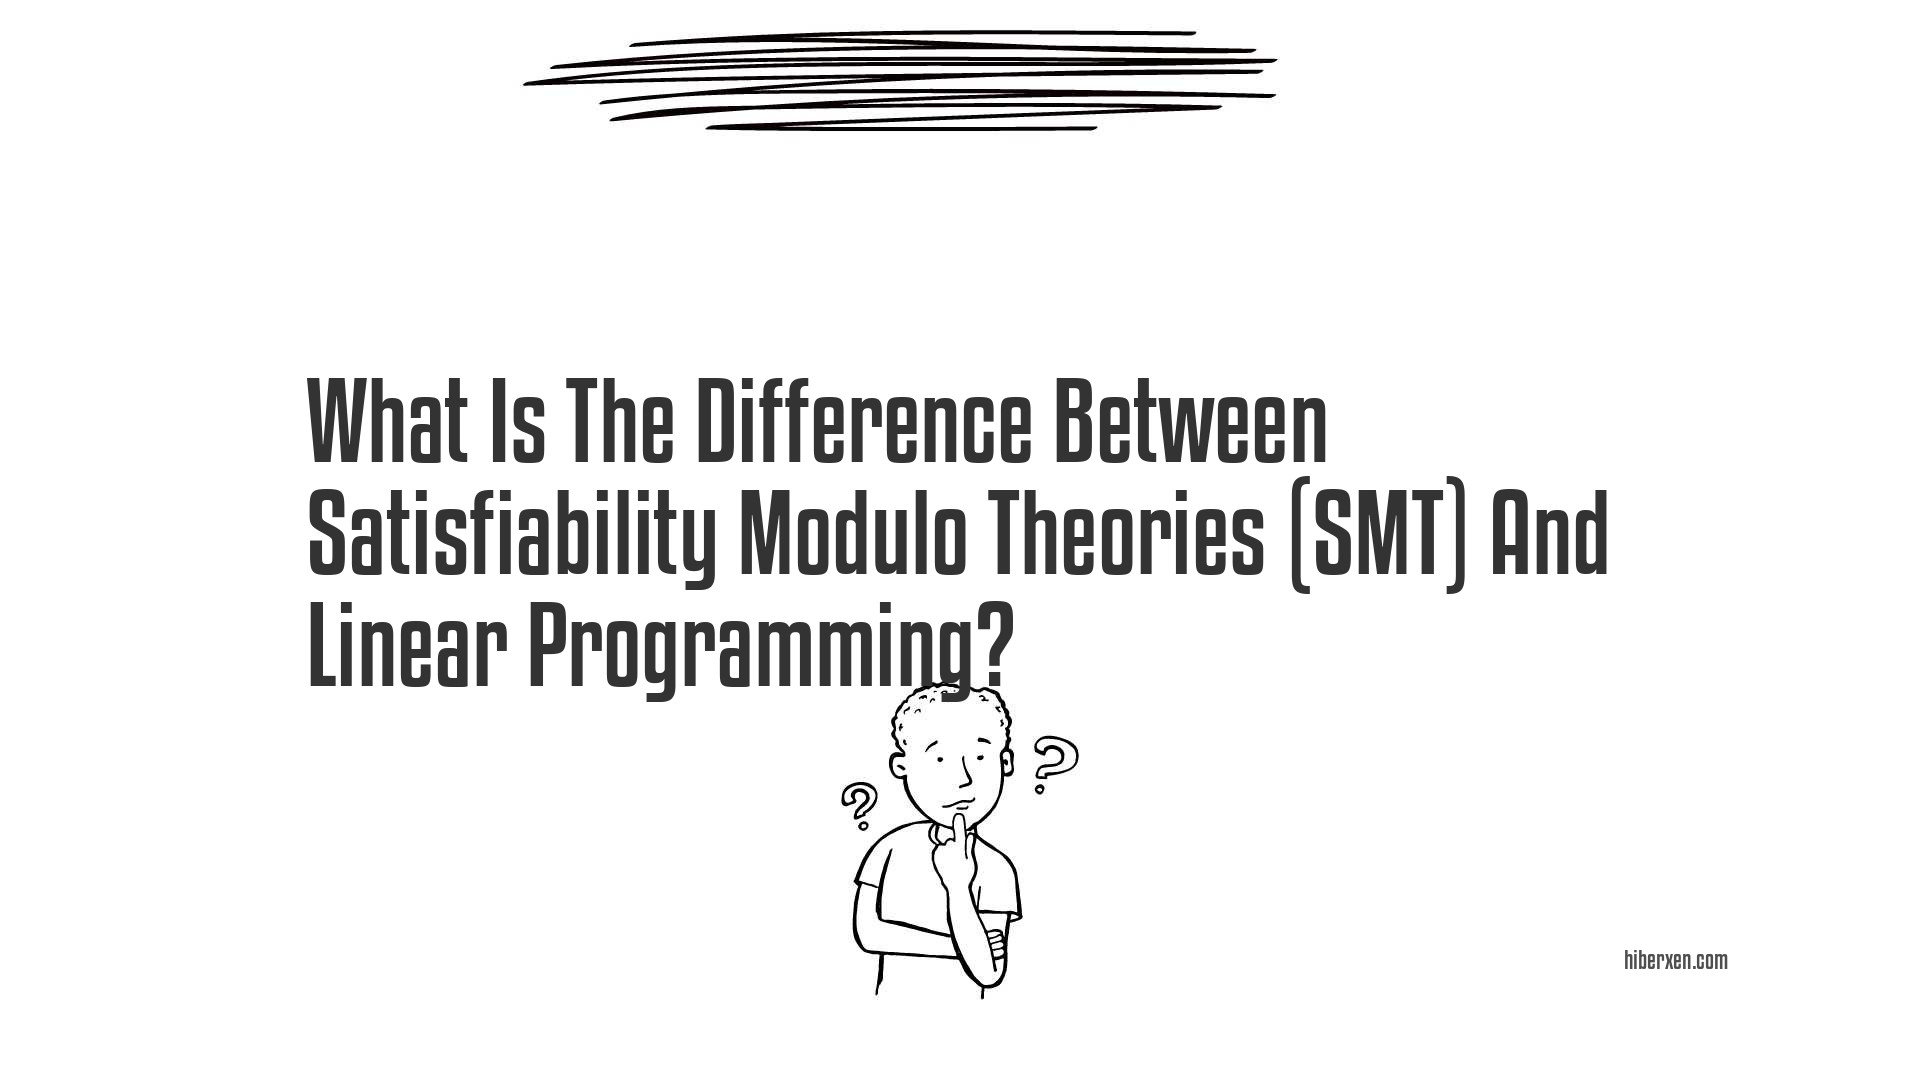 What Is The Difference Between Satisfiability Modulo Theories (SMT) And Linear Programming?